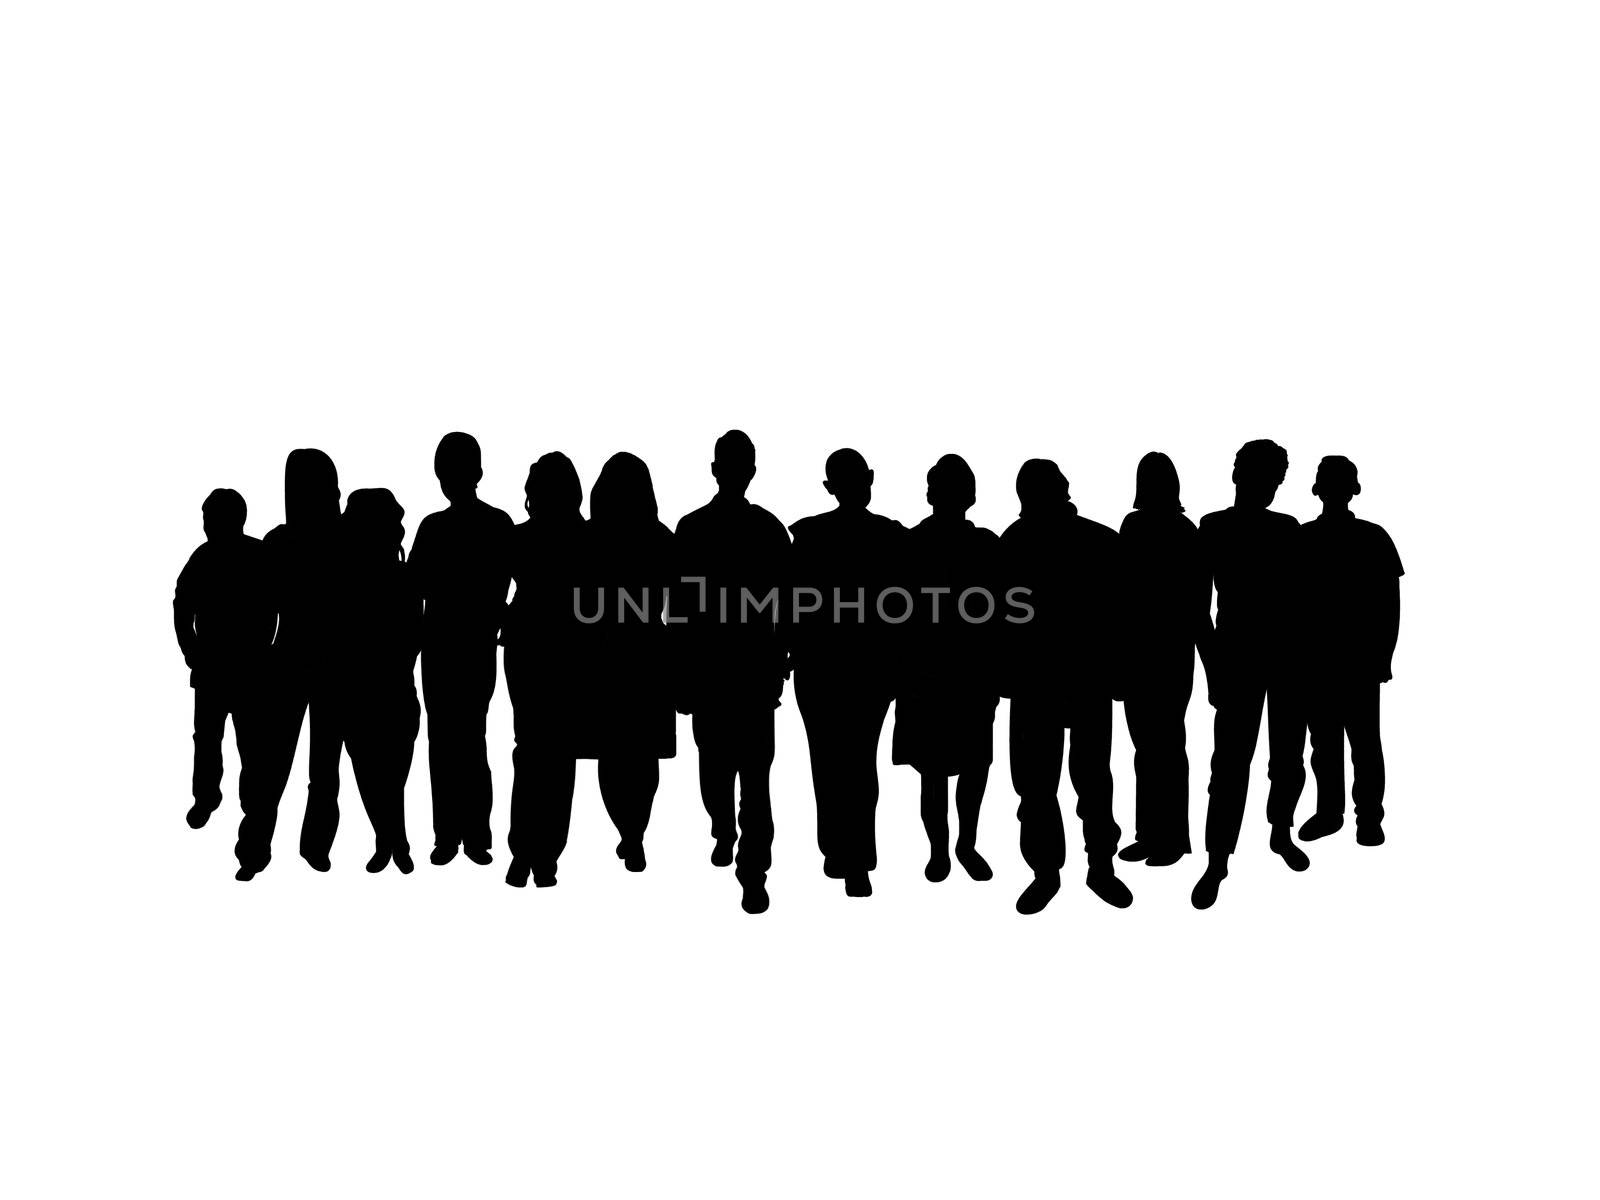 A group of people

